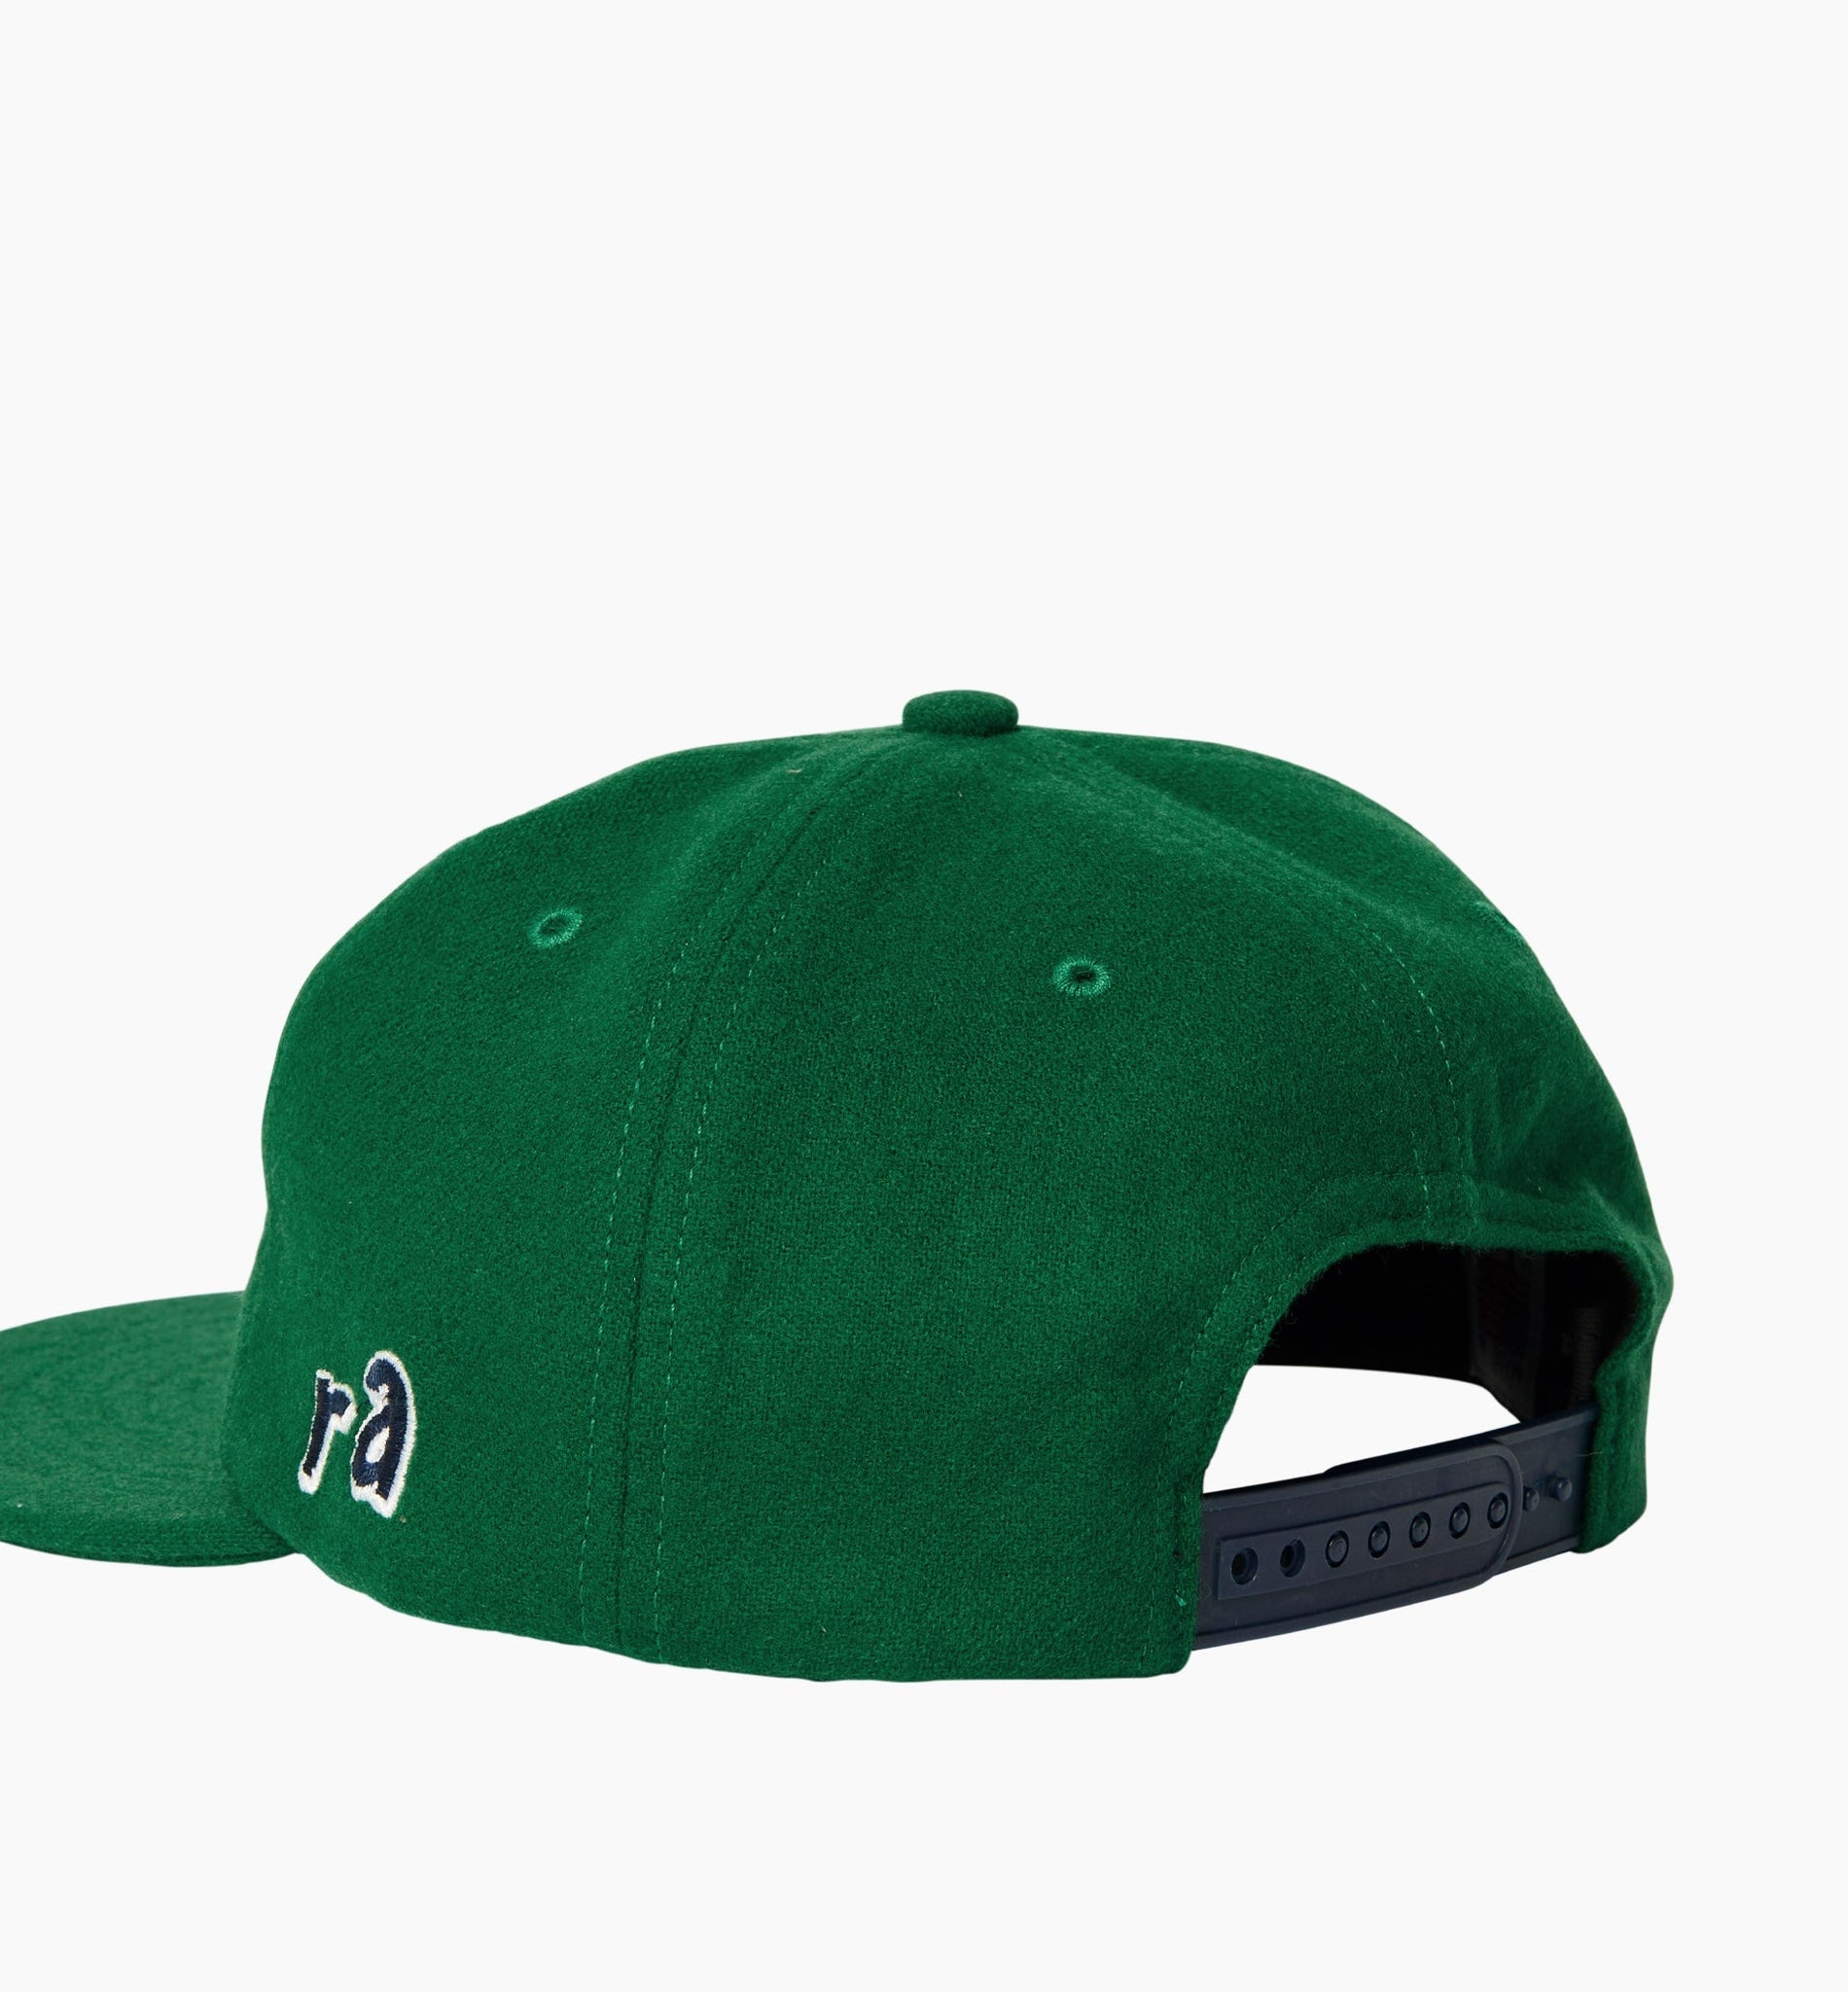 Loudness 6 Panel Hat - Green